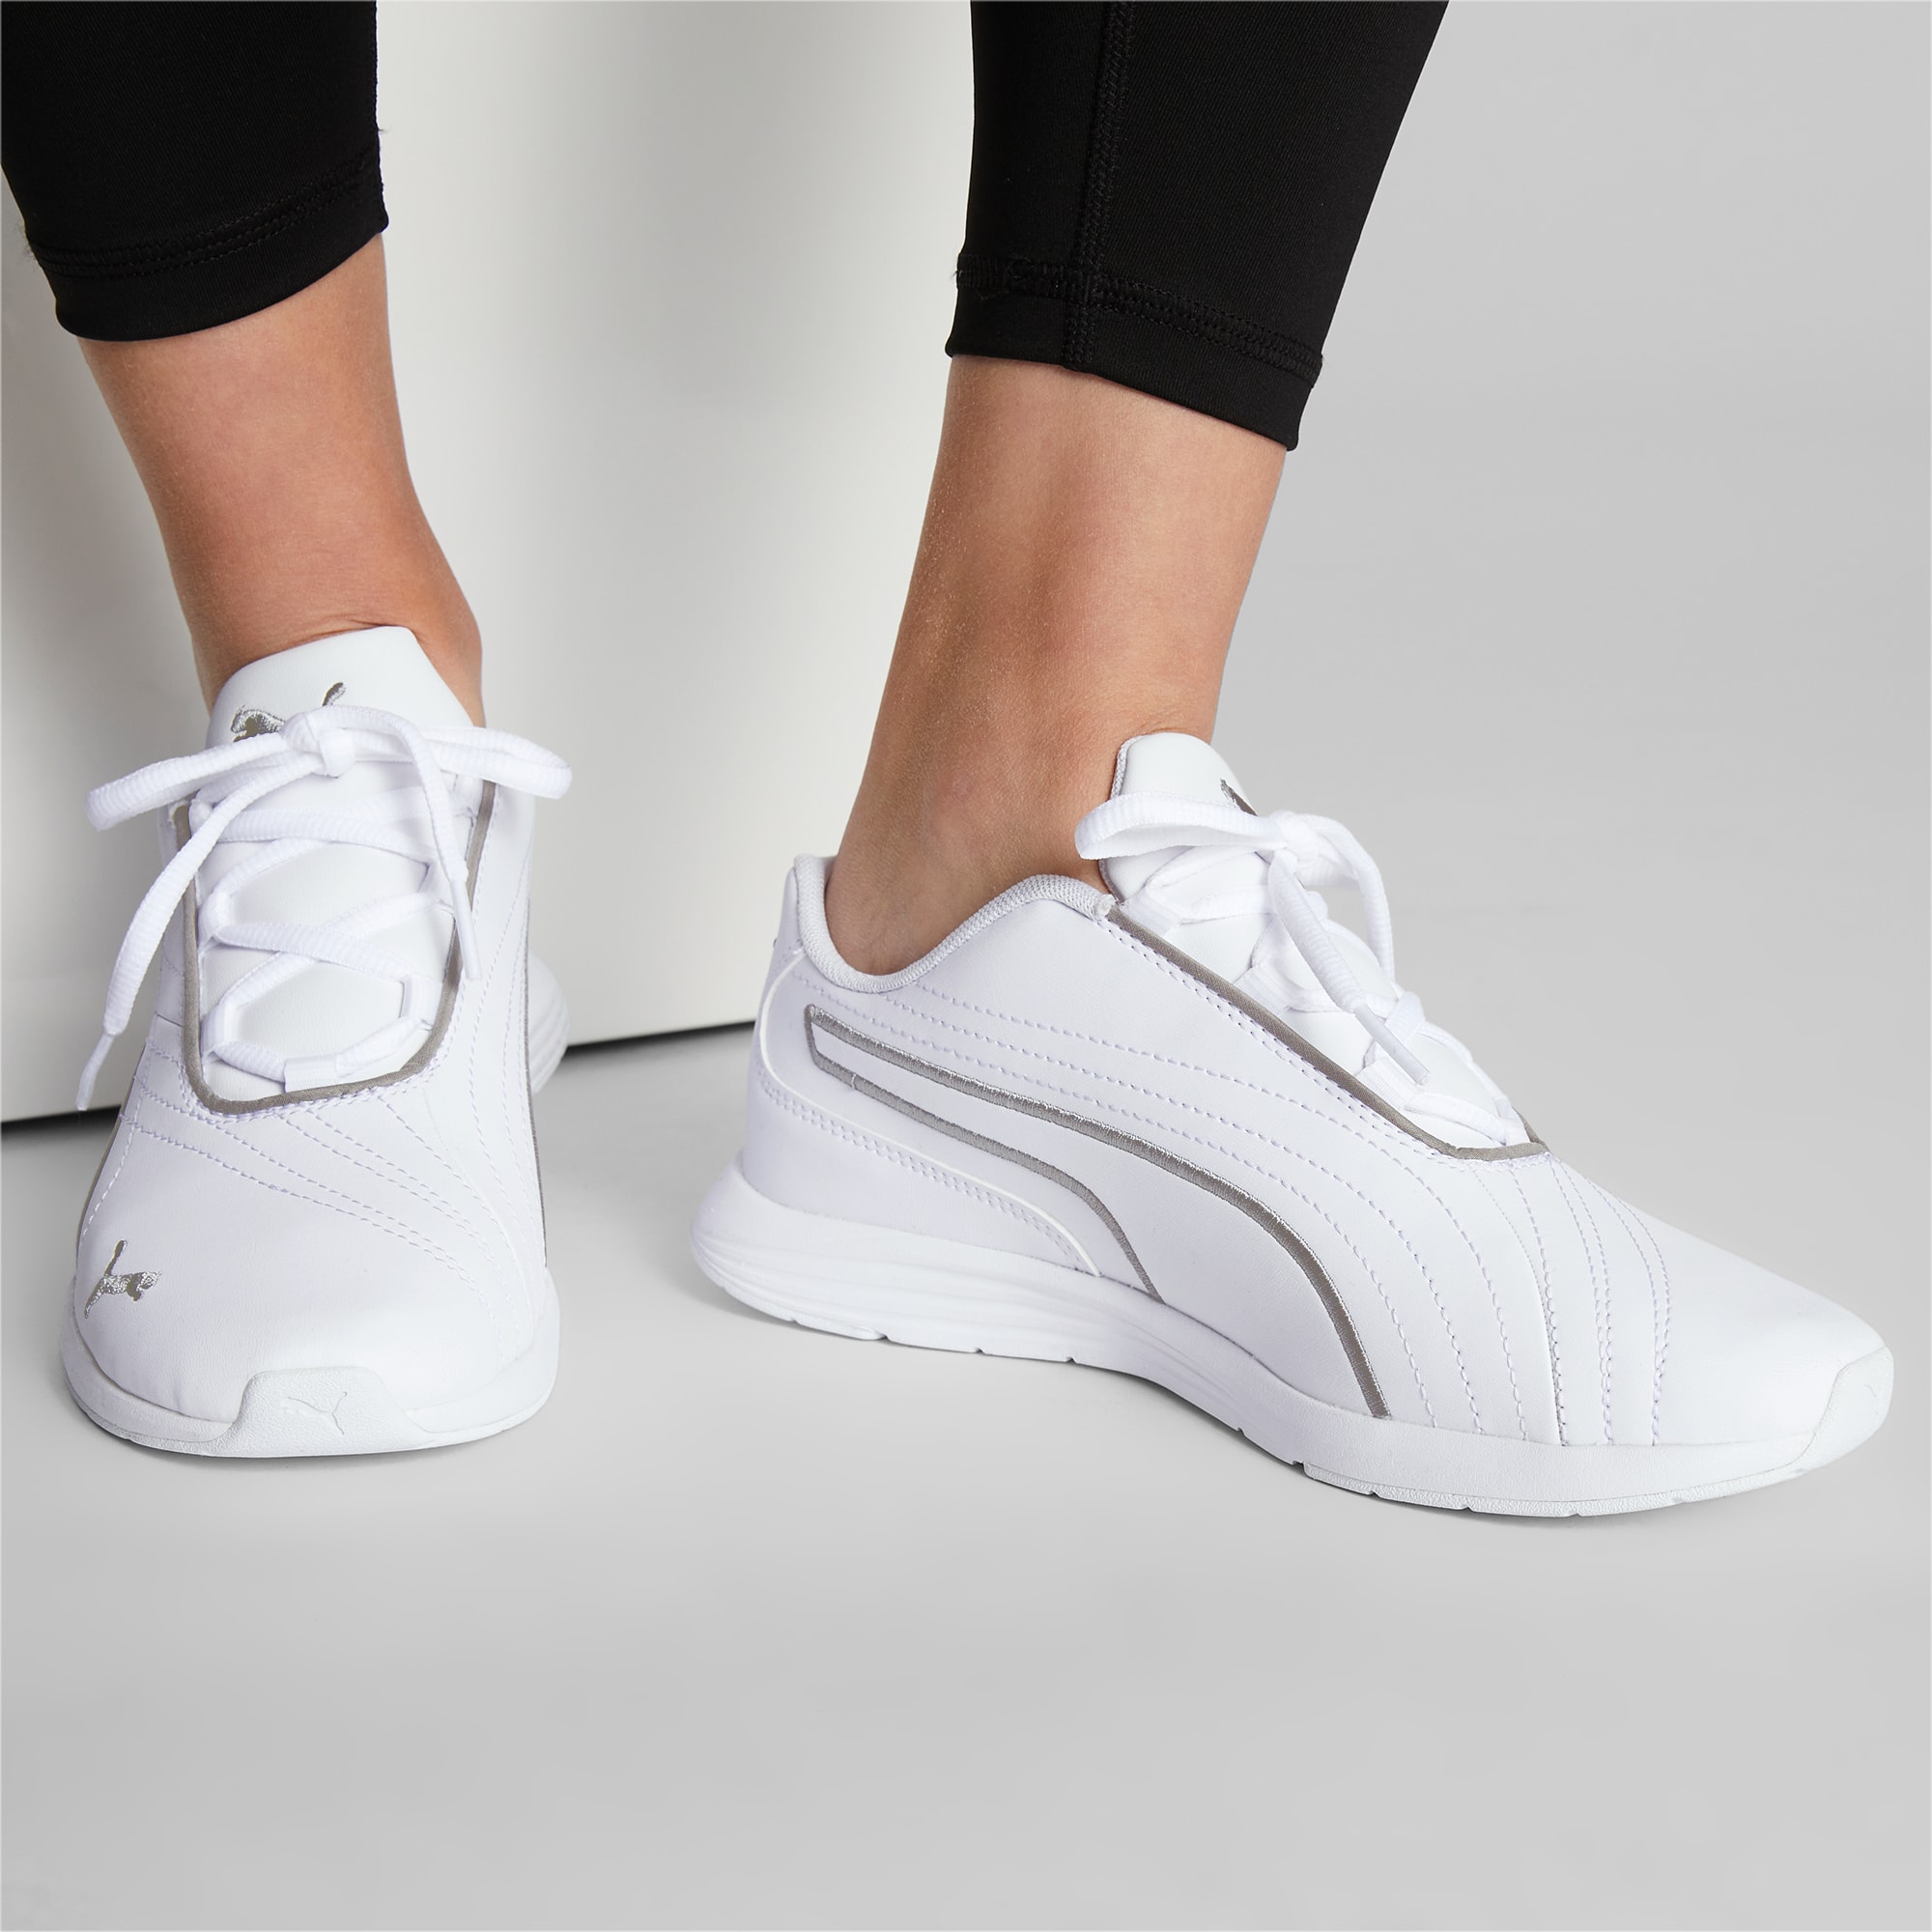 PUMA Women's Ella Lace Up Shoes I Used It Just For One Time I only wore it  once